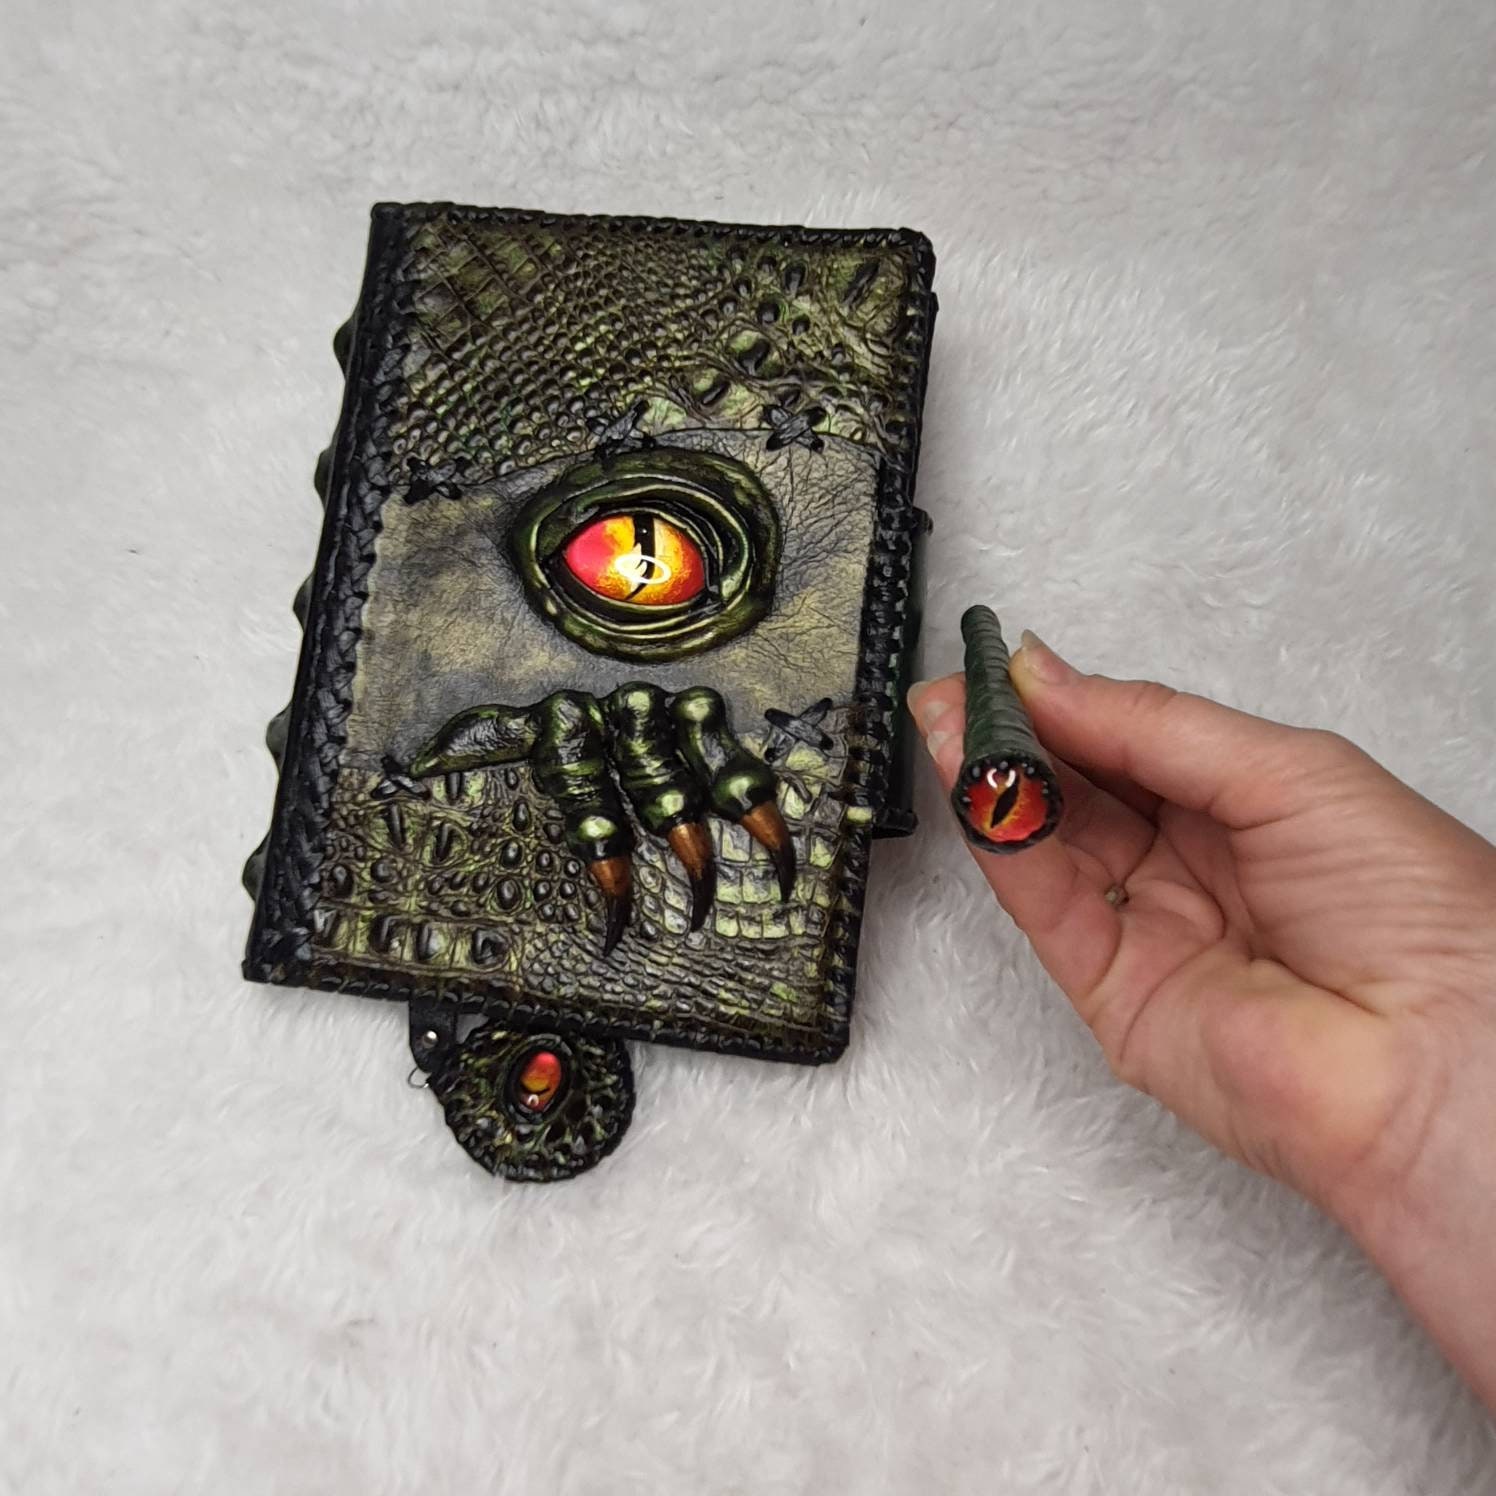 3D Dragon Leather Book,spellbook,magic Ritual,gothic Claw Dragon,dragon  Eye,gift,fantasy,grimoire,dungeons and Dragons Book,evil Eye,larp 